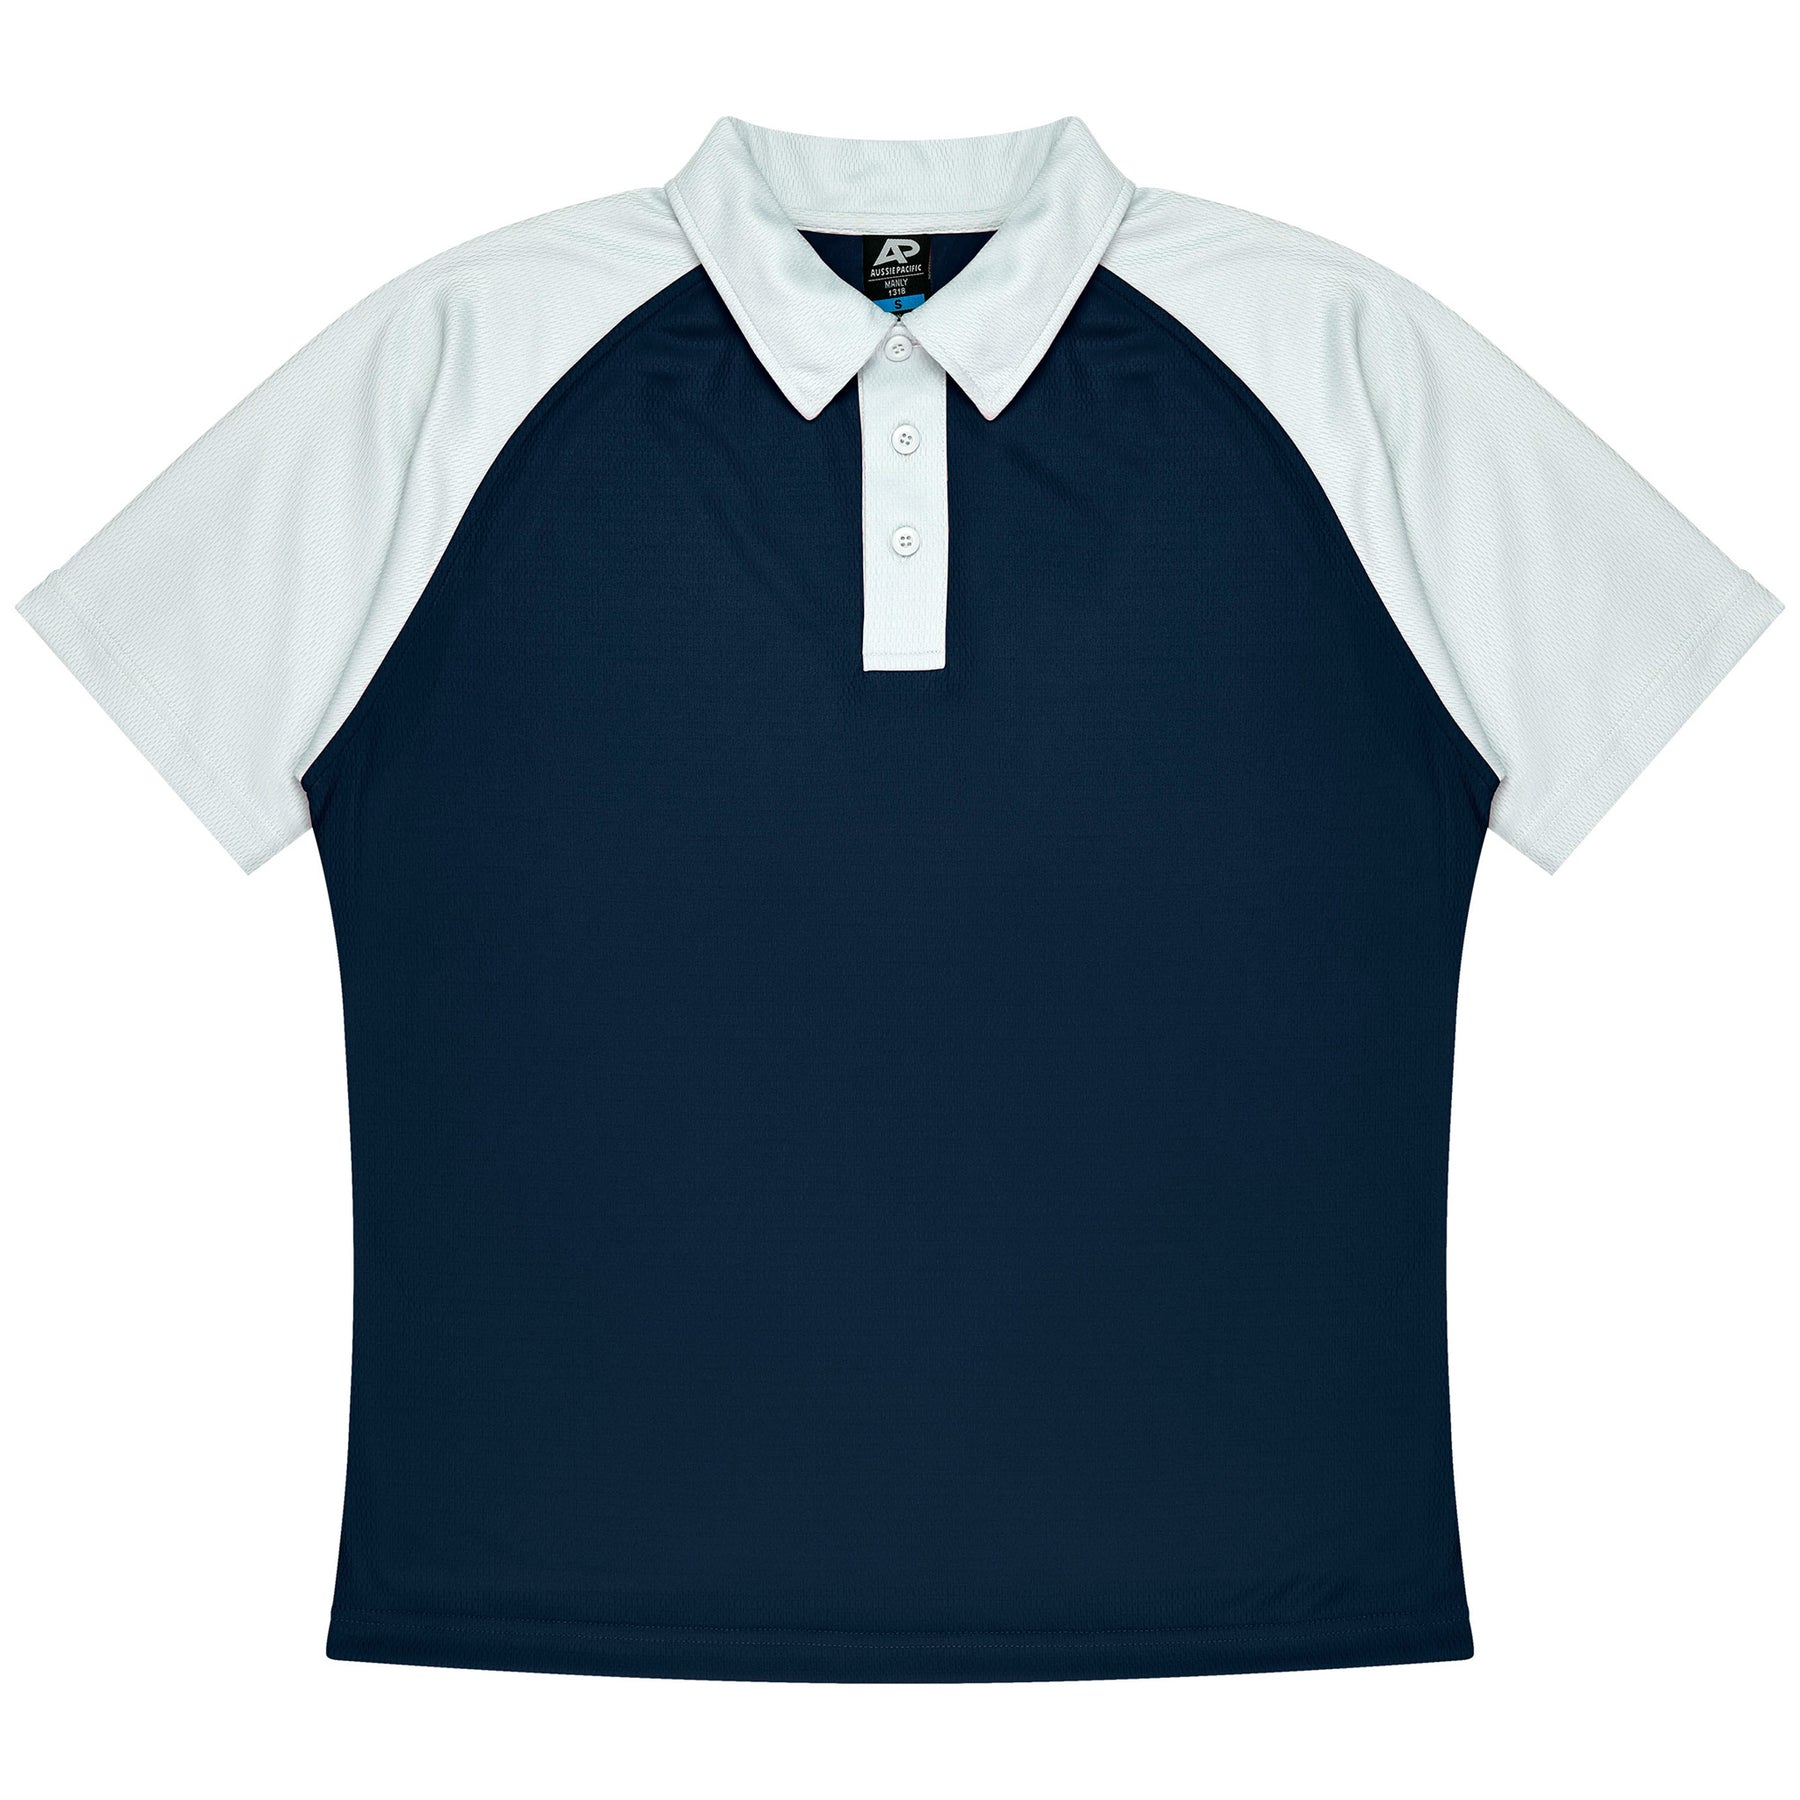 manly kids polo in navy white